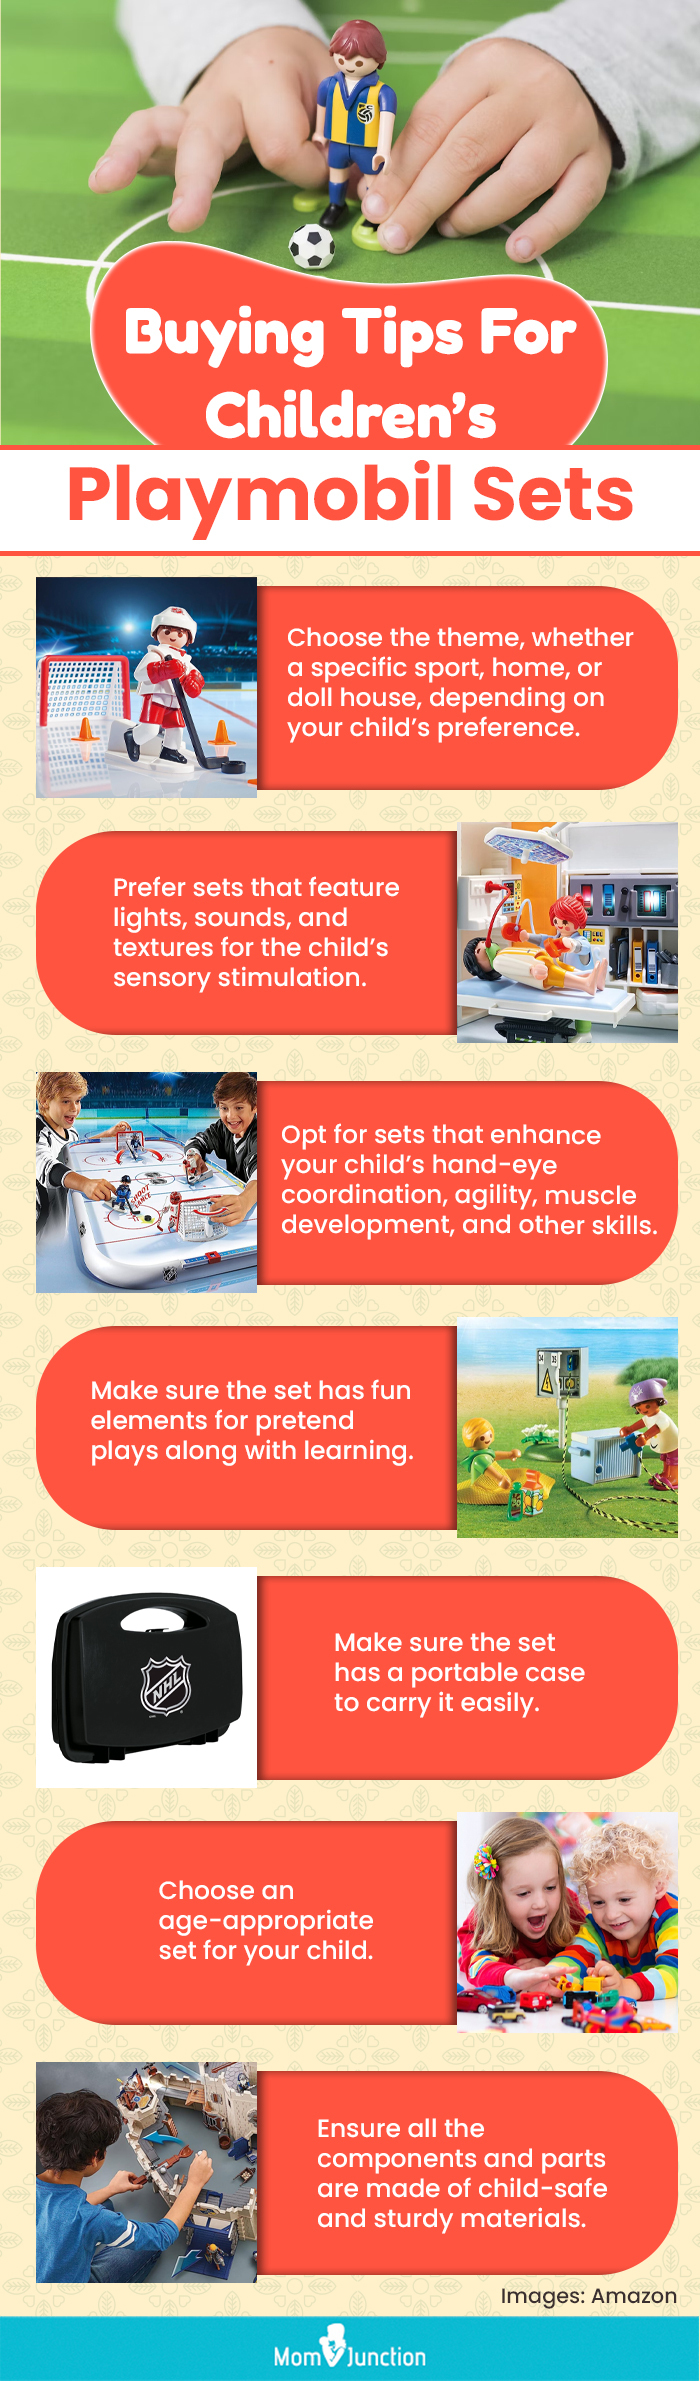 Buying Tips For Children’s Playmobil Sets (infographic)